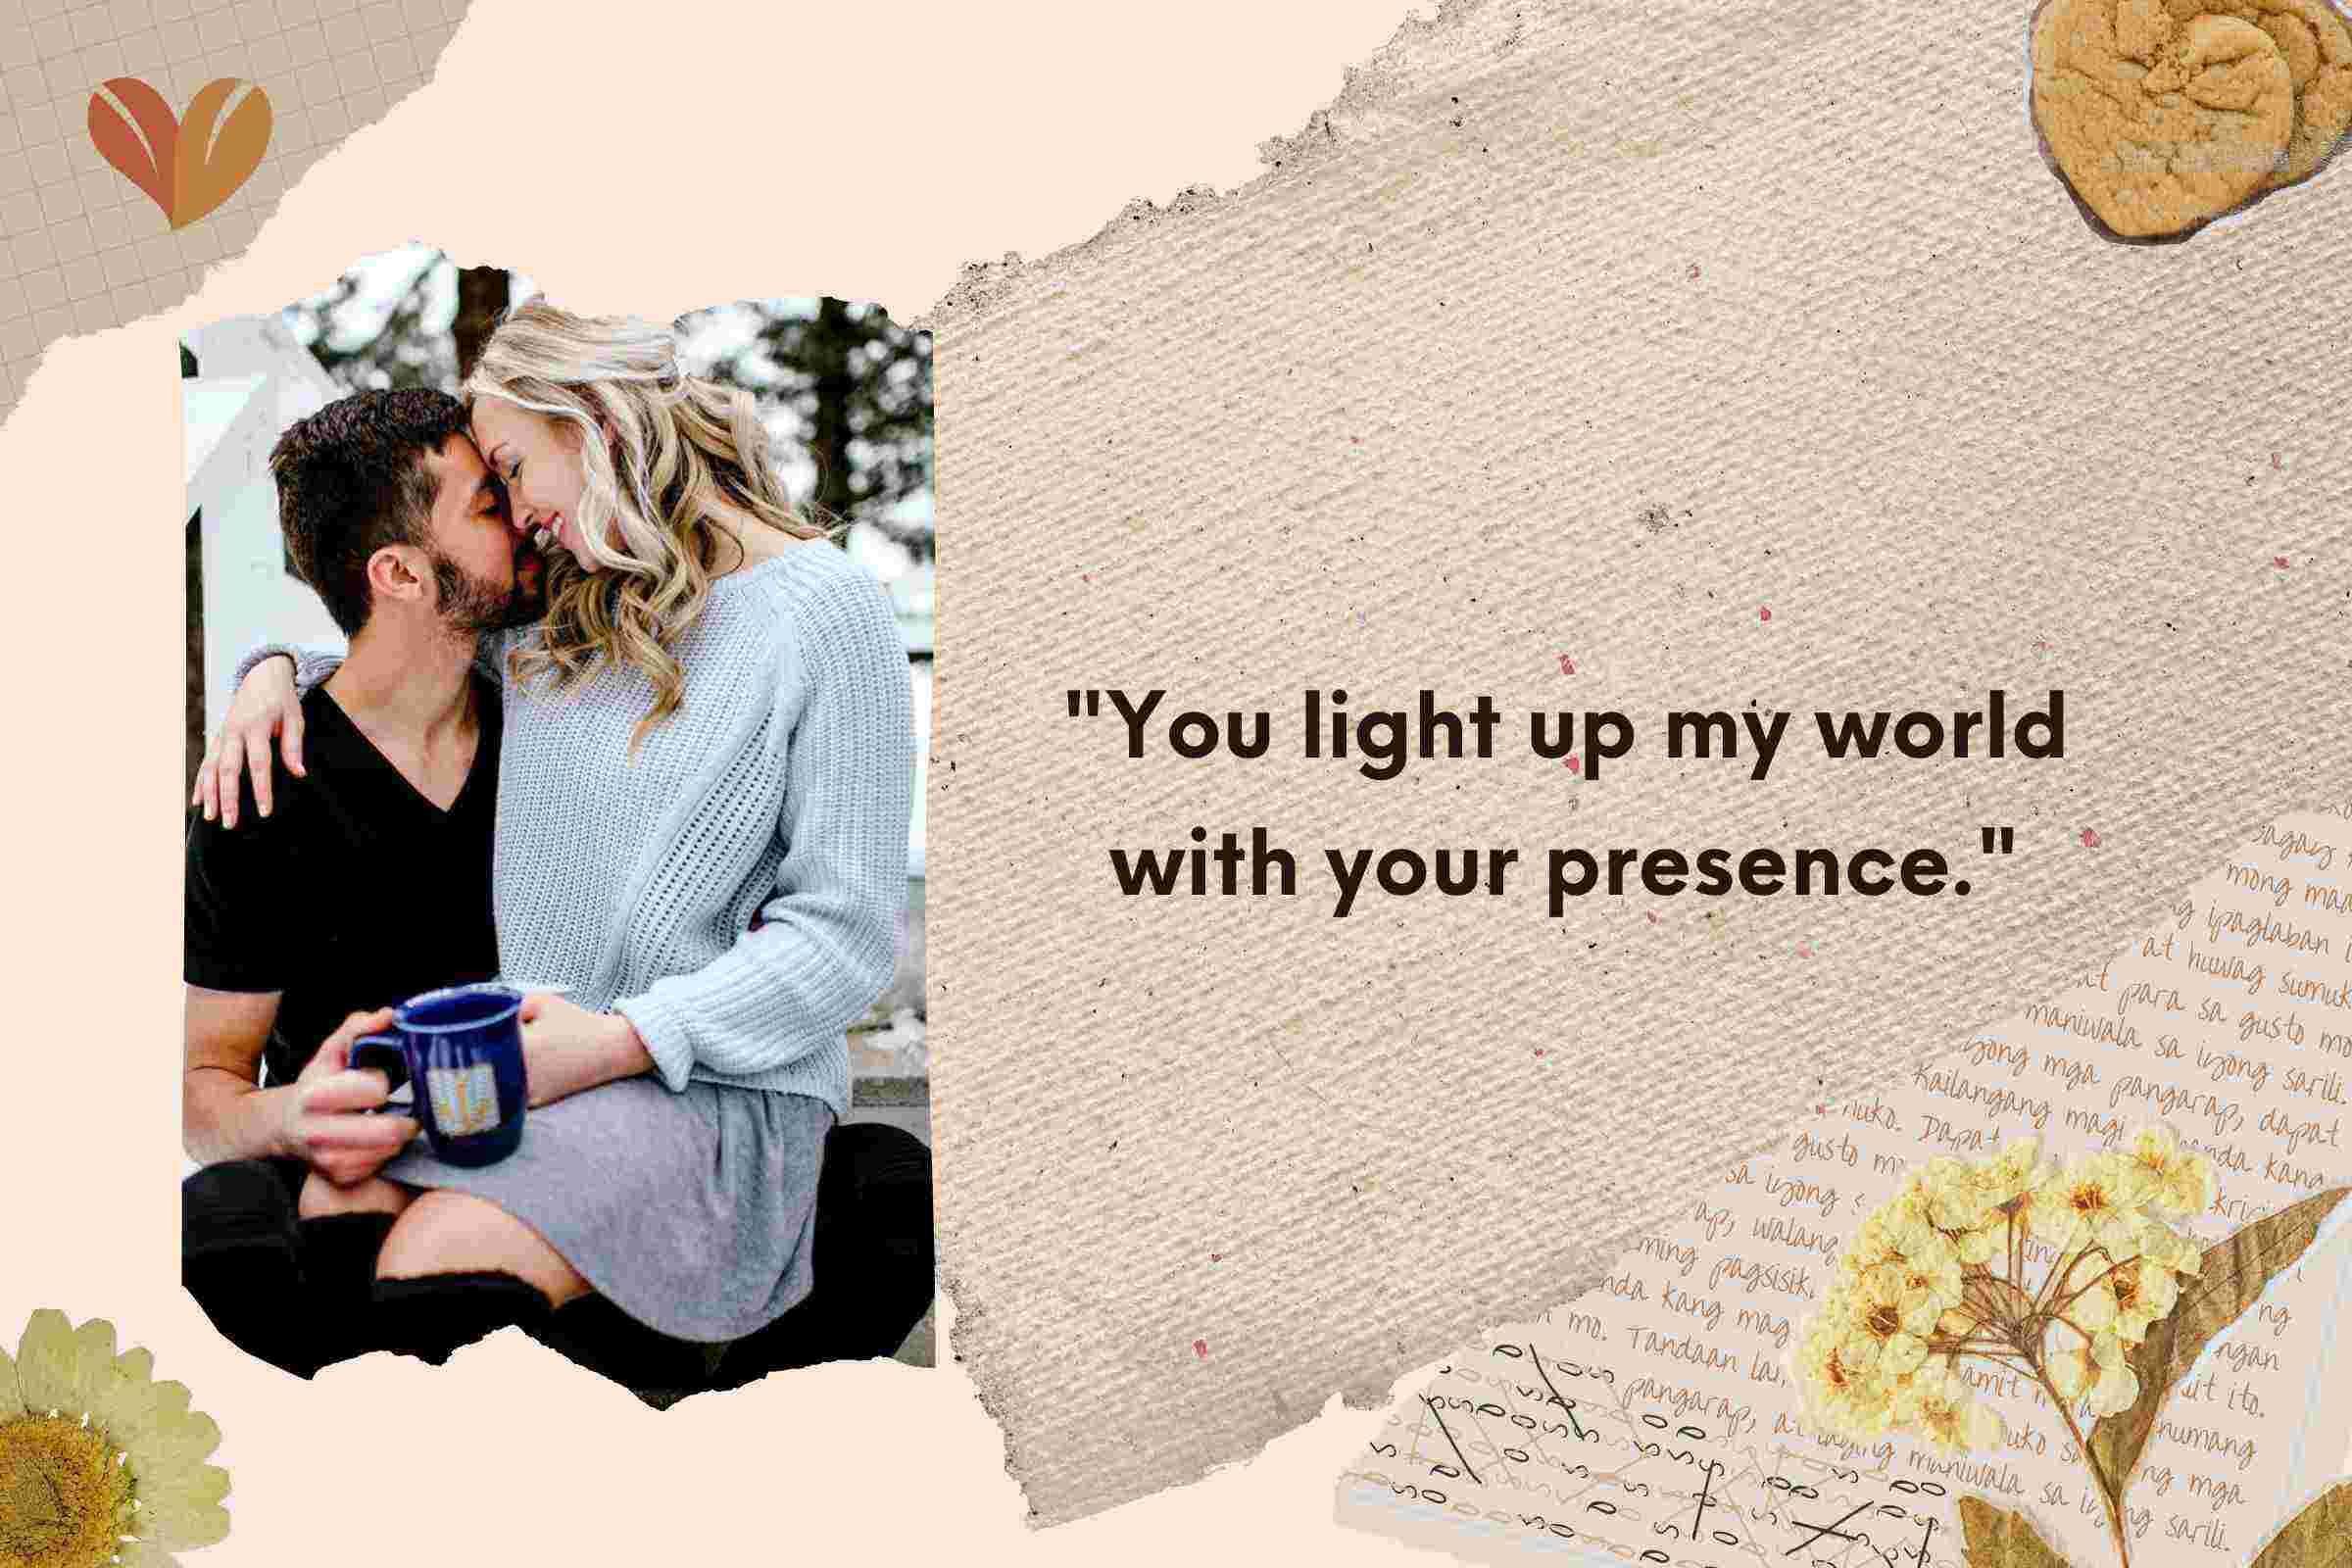 You light up my world with your presence.